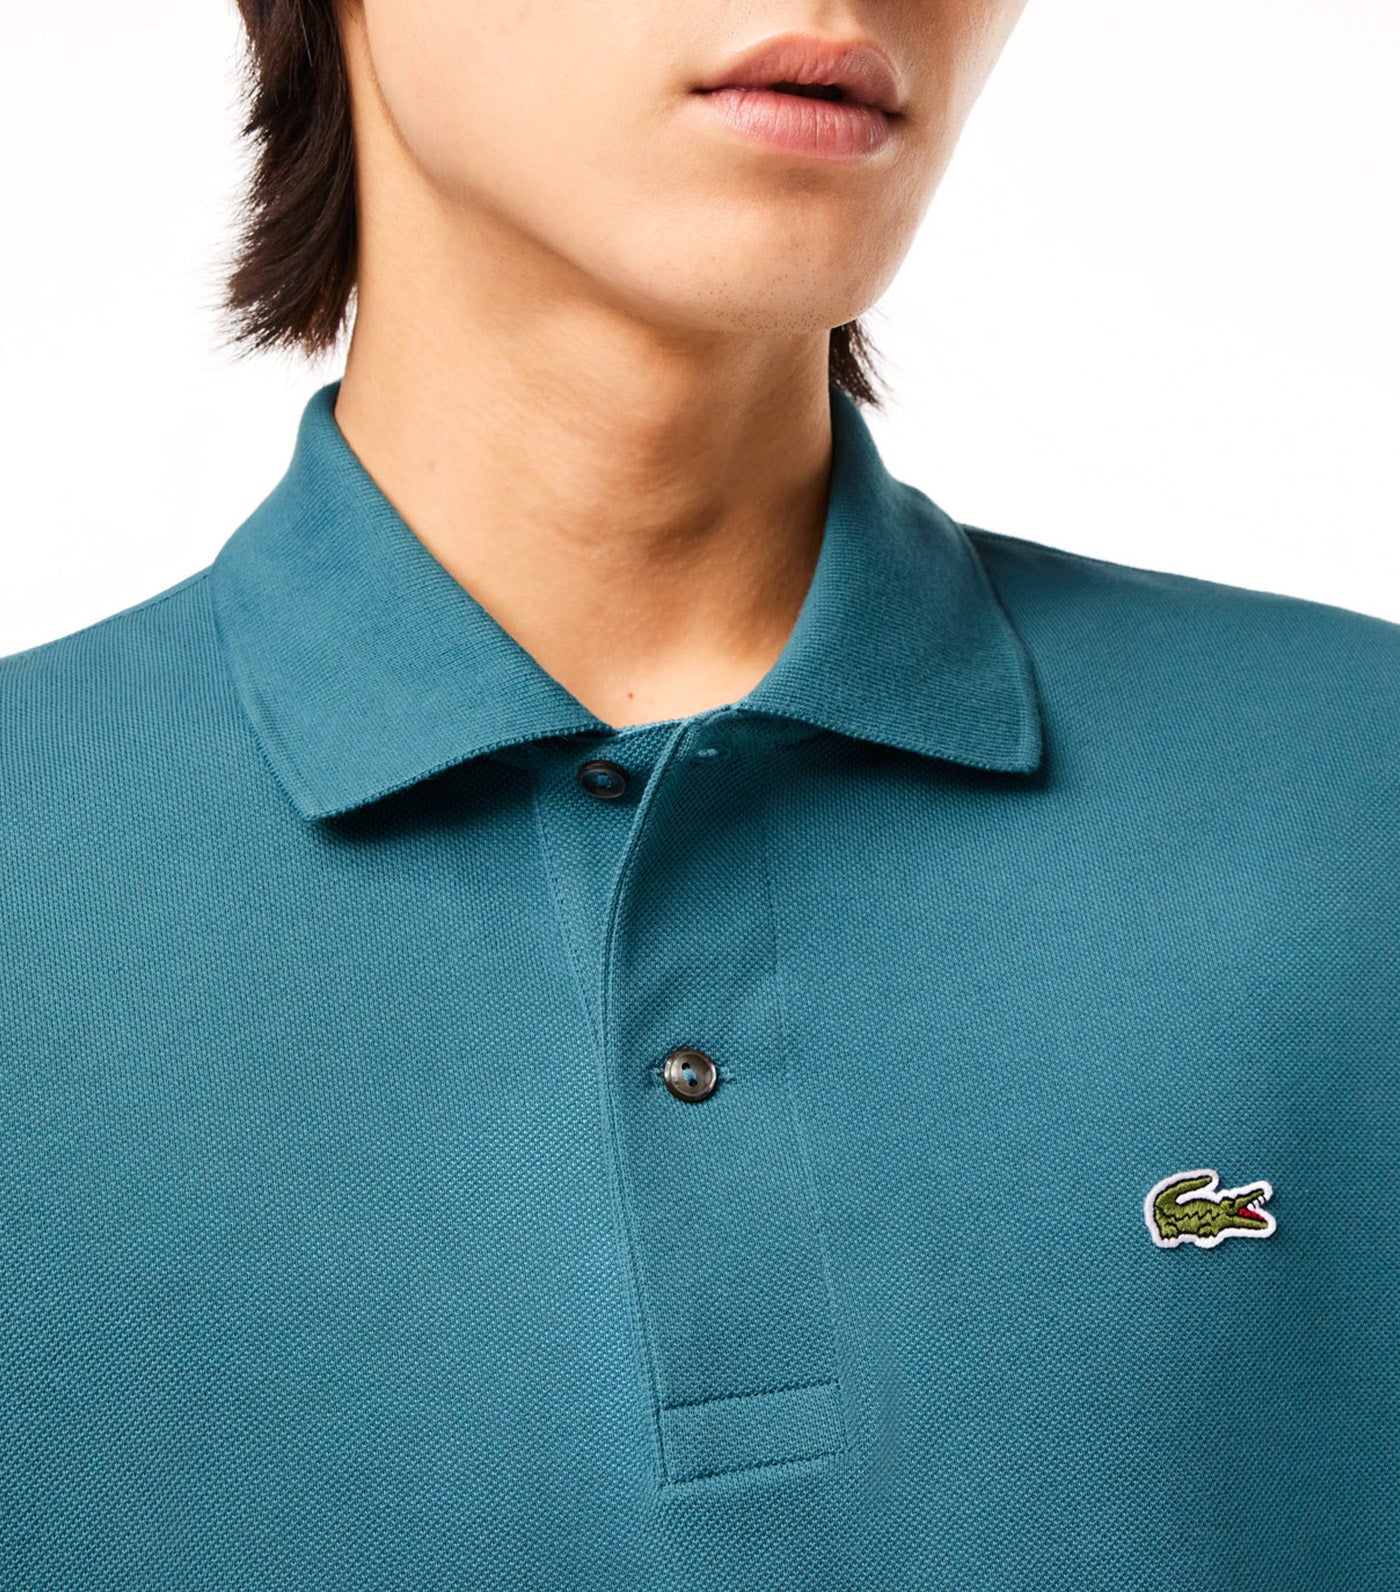 Lacoste Classic Fit L.12.12 Polo Shirt Hydro